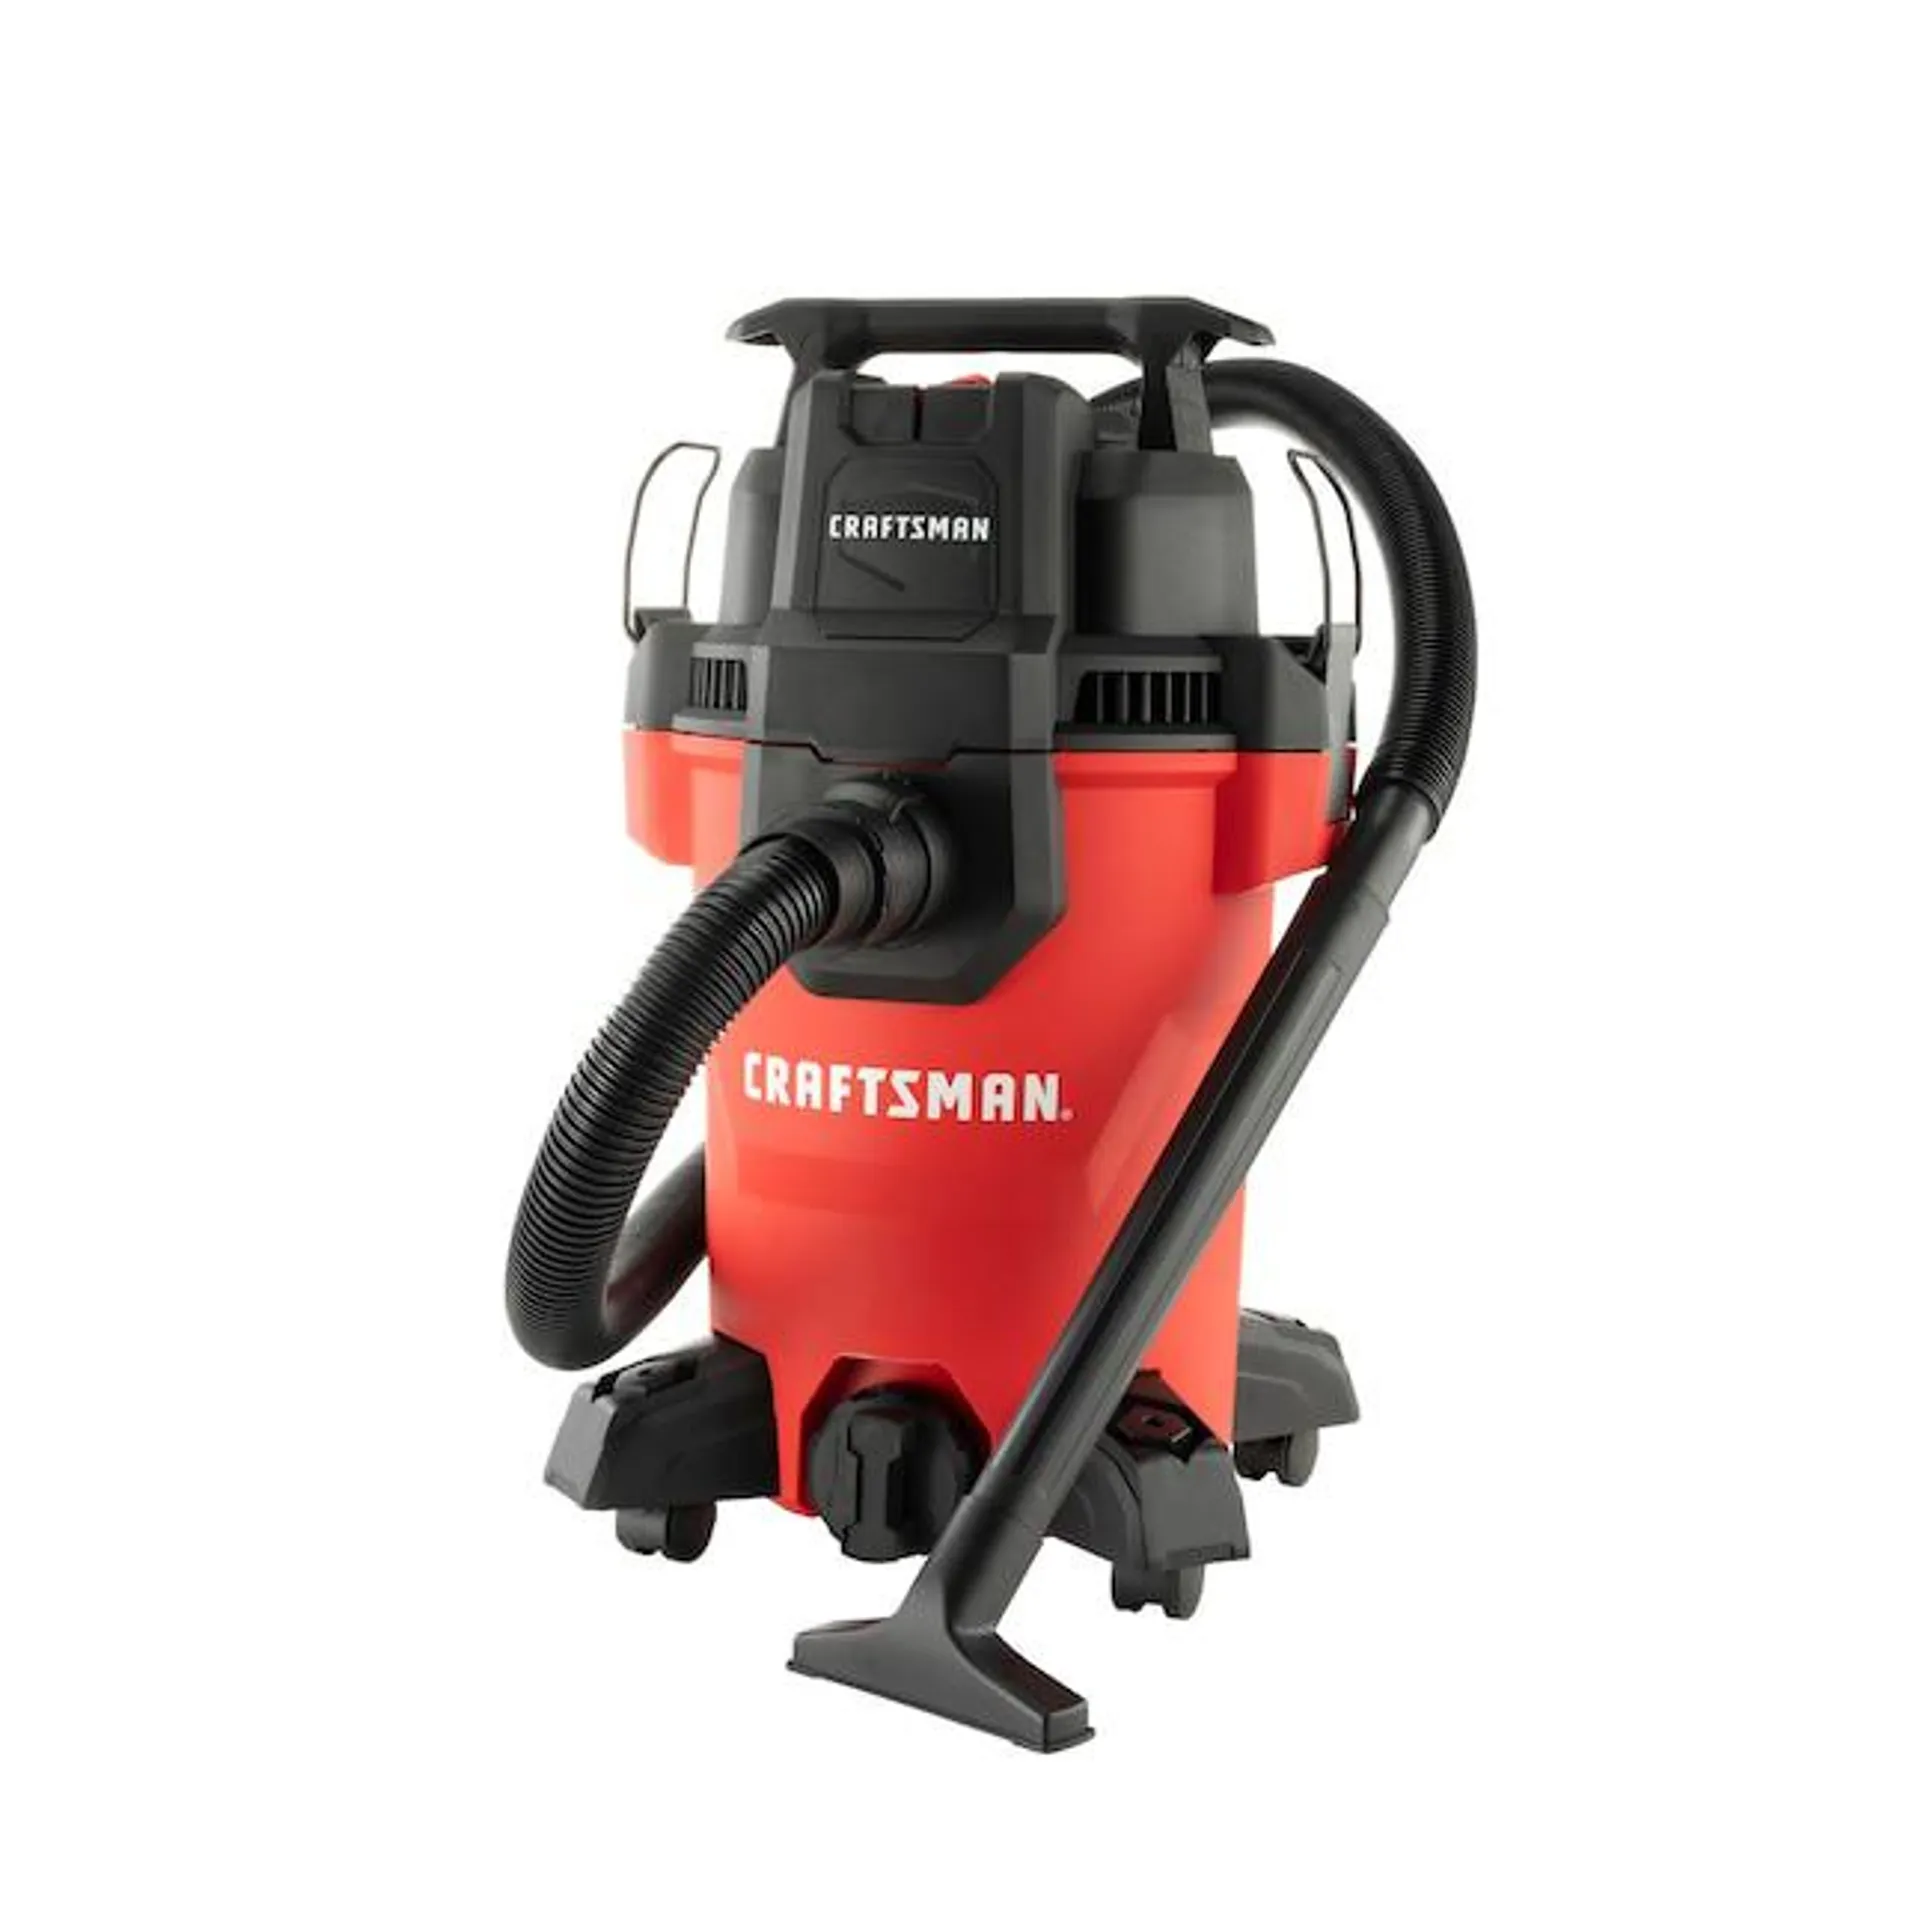 CRAFTSMAN 4-Gallons 3.5-HP Corded Wet/Dry Shop Vacuum with Accessories Included